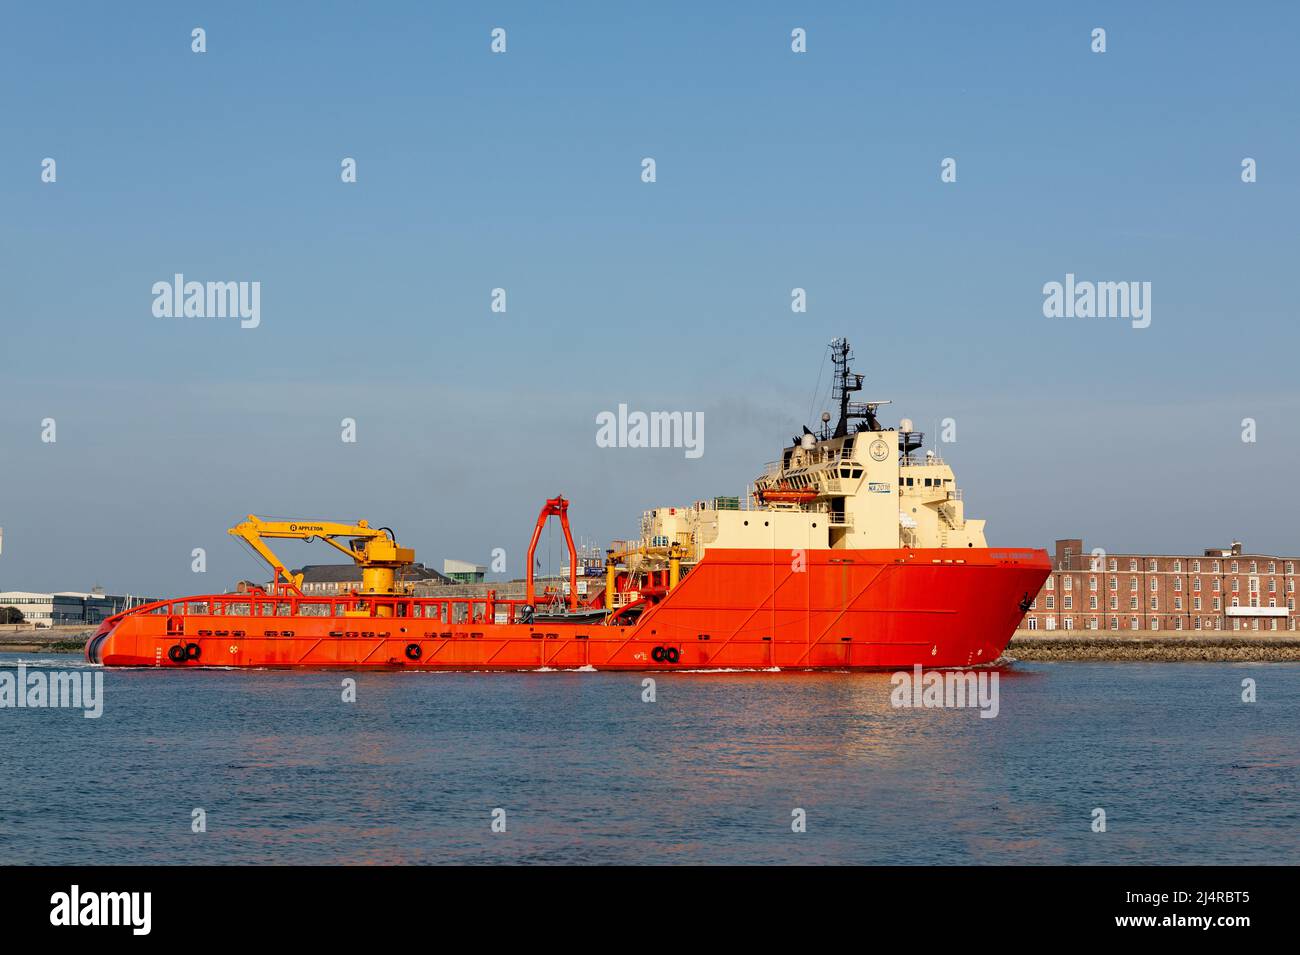 American ocean going tug and support vessel Gary Chouest arriving in Portsmouth Stock Photo